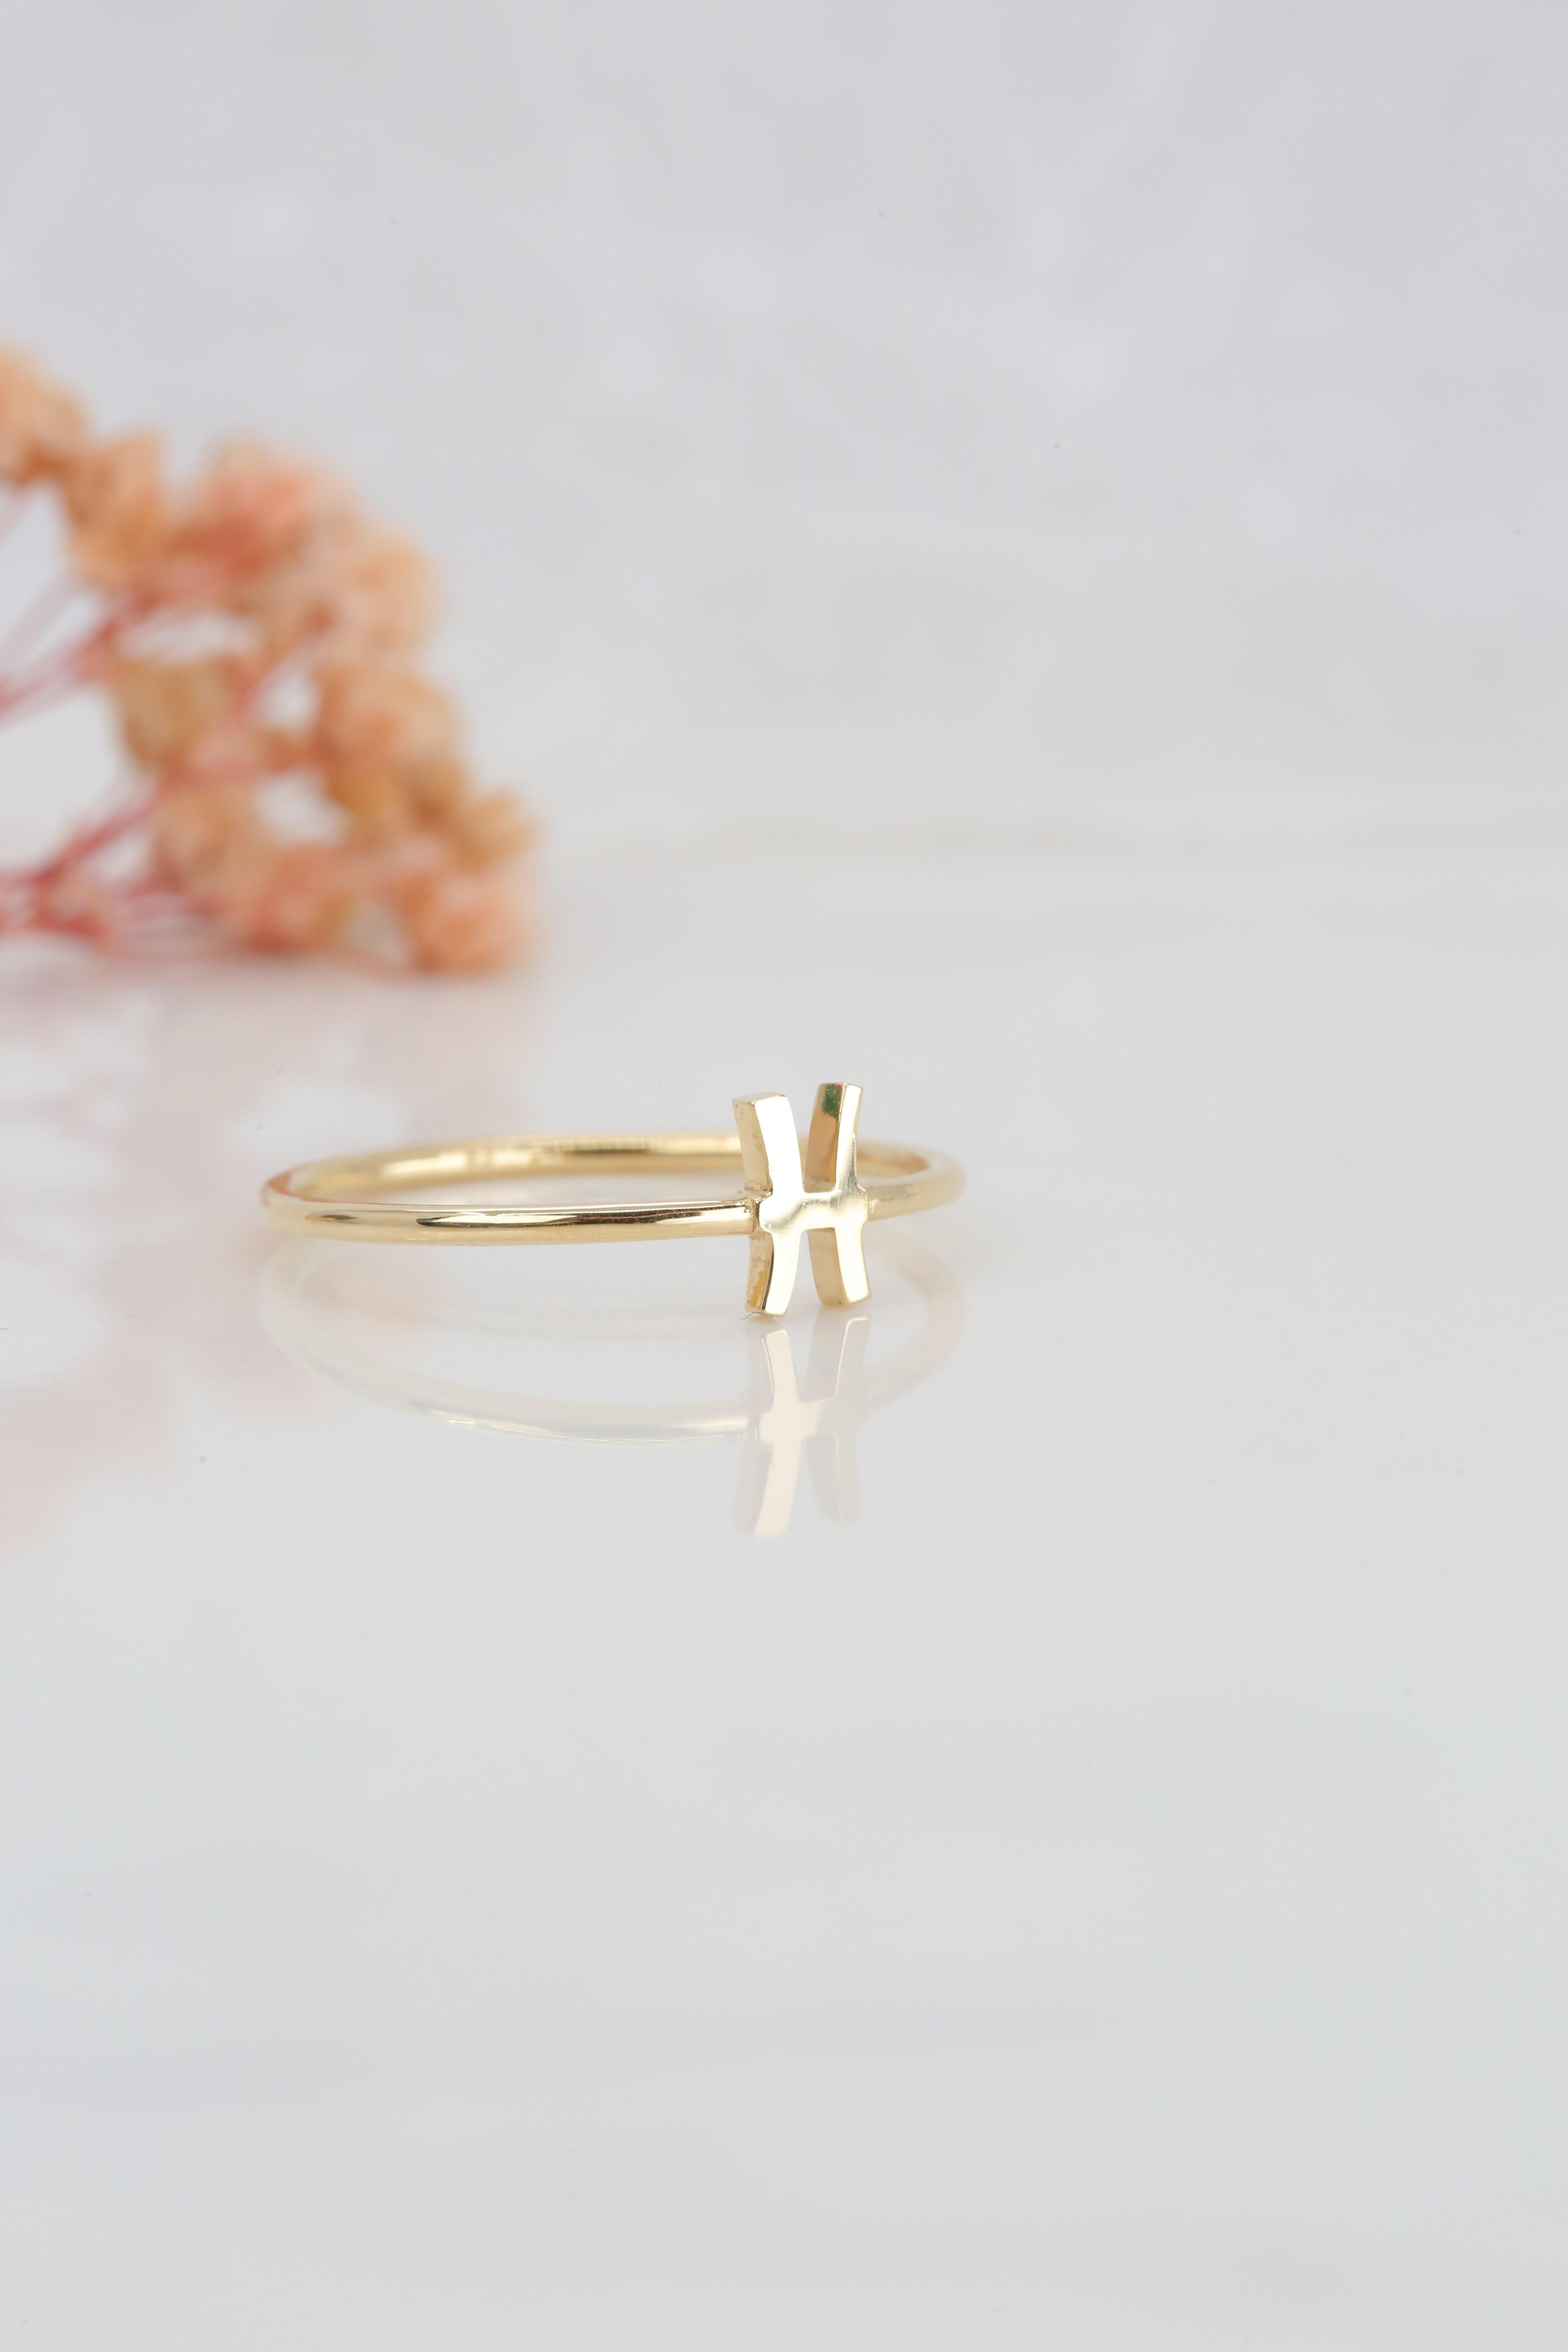 For Sale:  14K Gold Pisces Ring, Pisces Sign Gold Ring 9